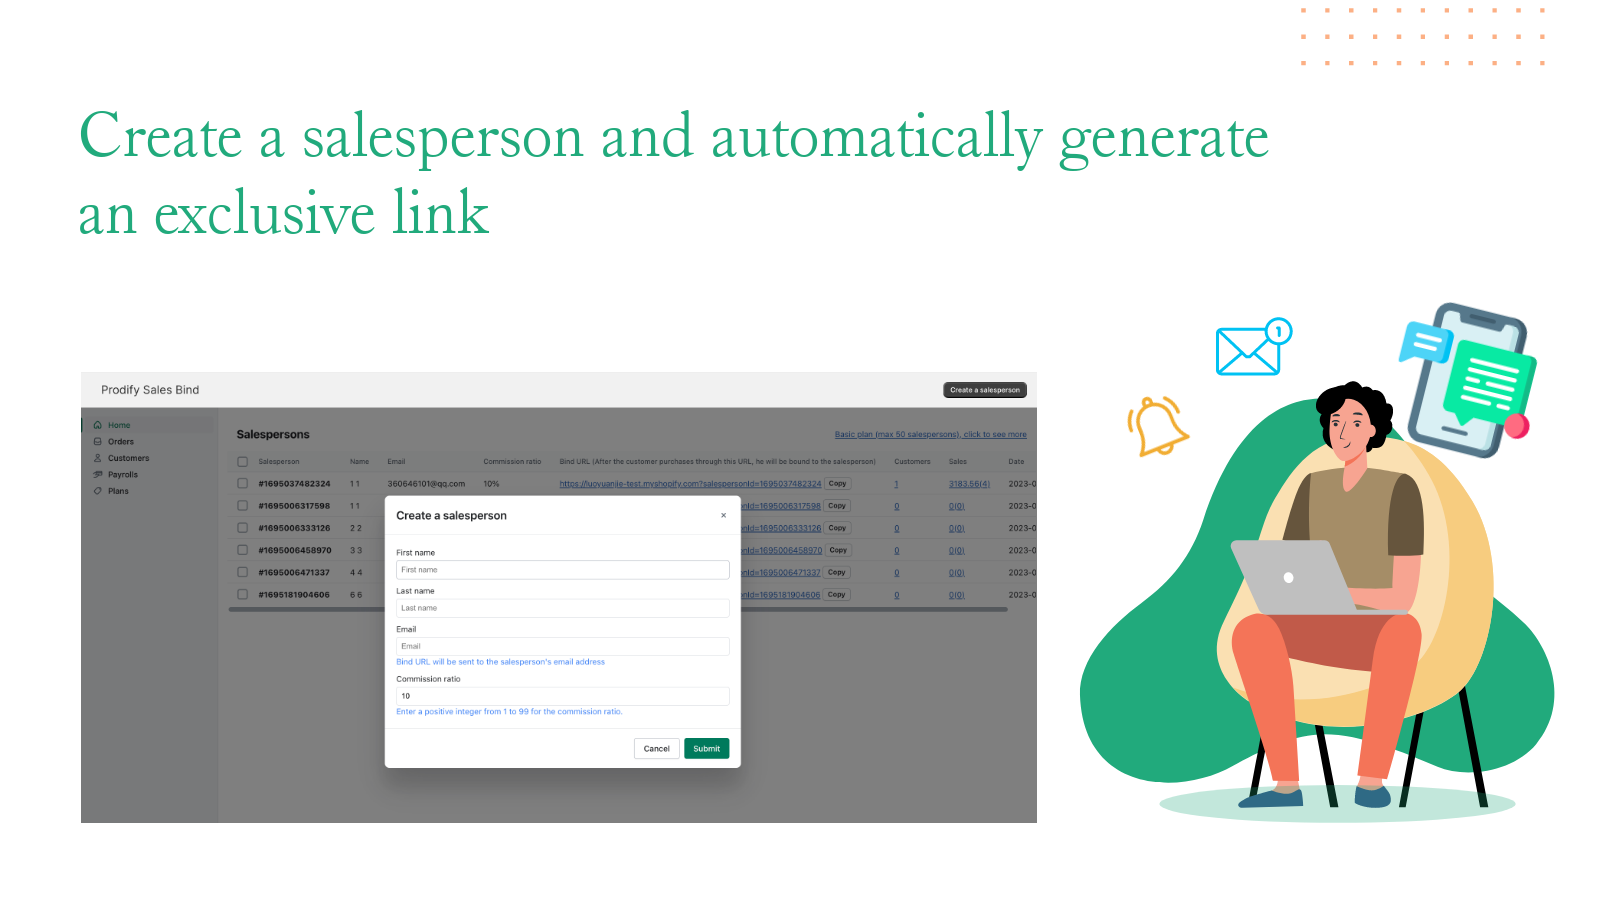 Create a salesperson and automatically generate exclusive link